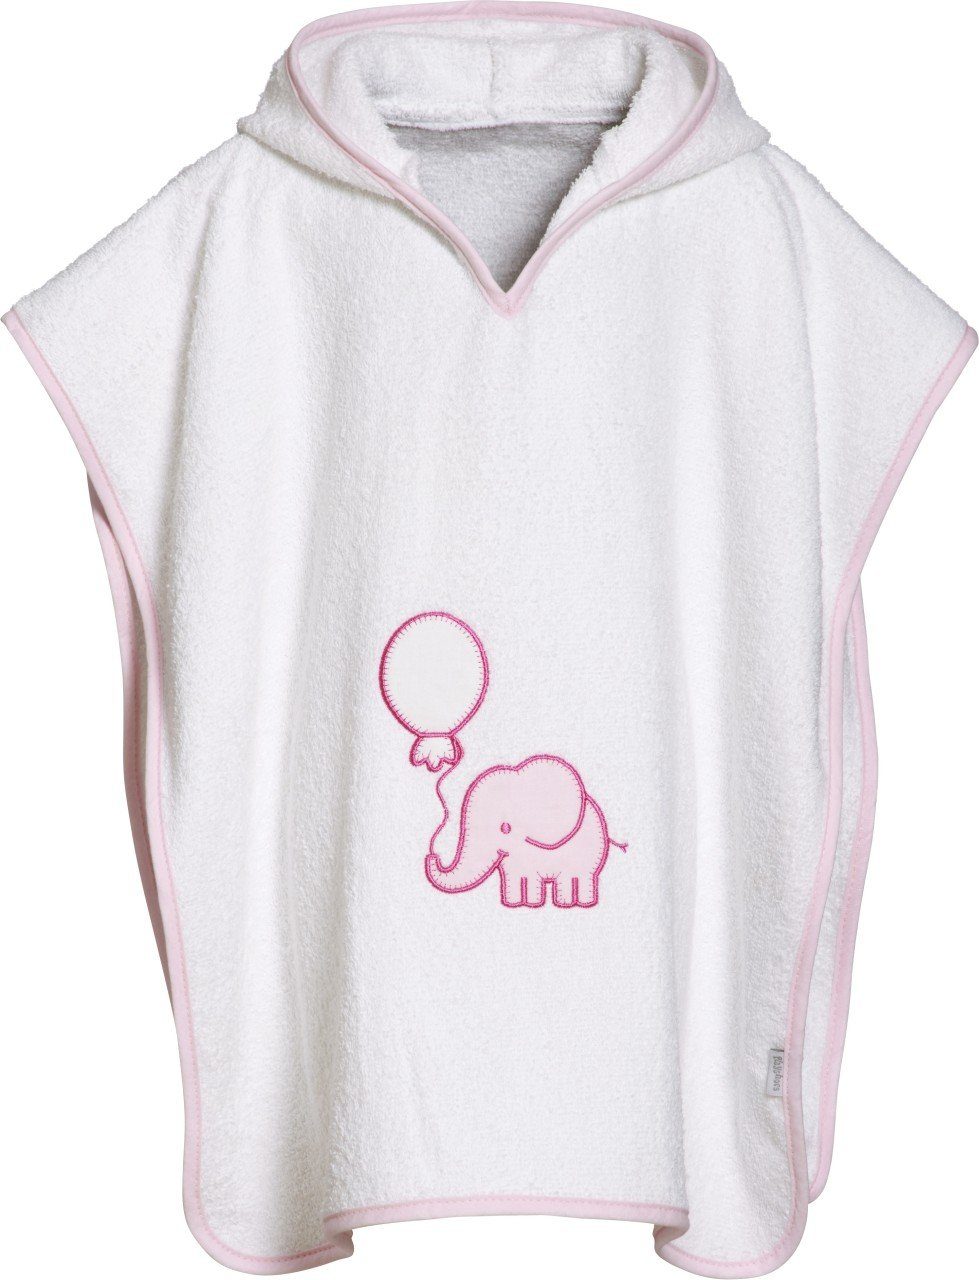 Badeponcho Elefant weiß/rosa Frottee-Poncho Playshoes